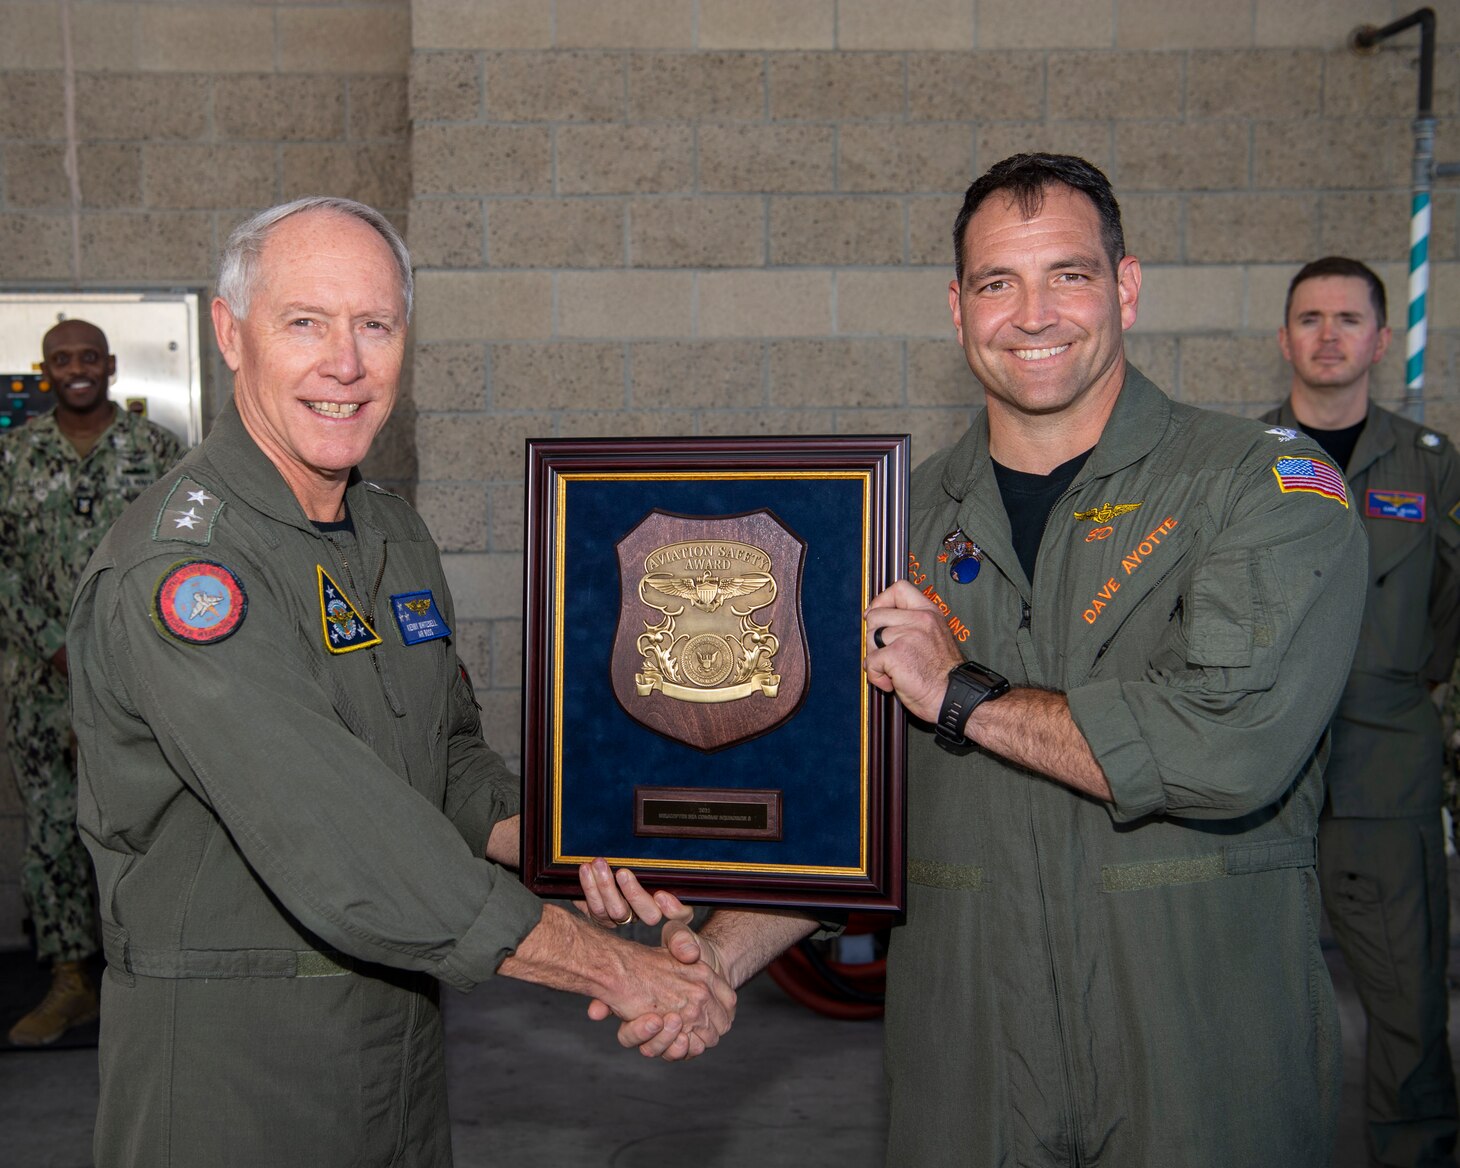 Vice Adm. Kenneth Whitesell, Commander, U.S. Naval Air Forces, left, presents the 2021 Chief of Naval Operations (CNO) Aviation Safety Award to Capt. David Ayotte, commanding officer of the “Merlins” of Helicopter Sea Combat Squadron (HSC) 3, during an award ceremony held aboard Naval Air Station North Island, Oct. 20, 2022